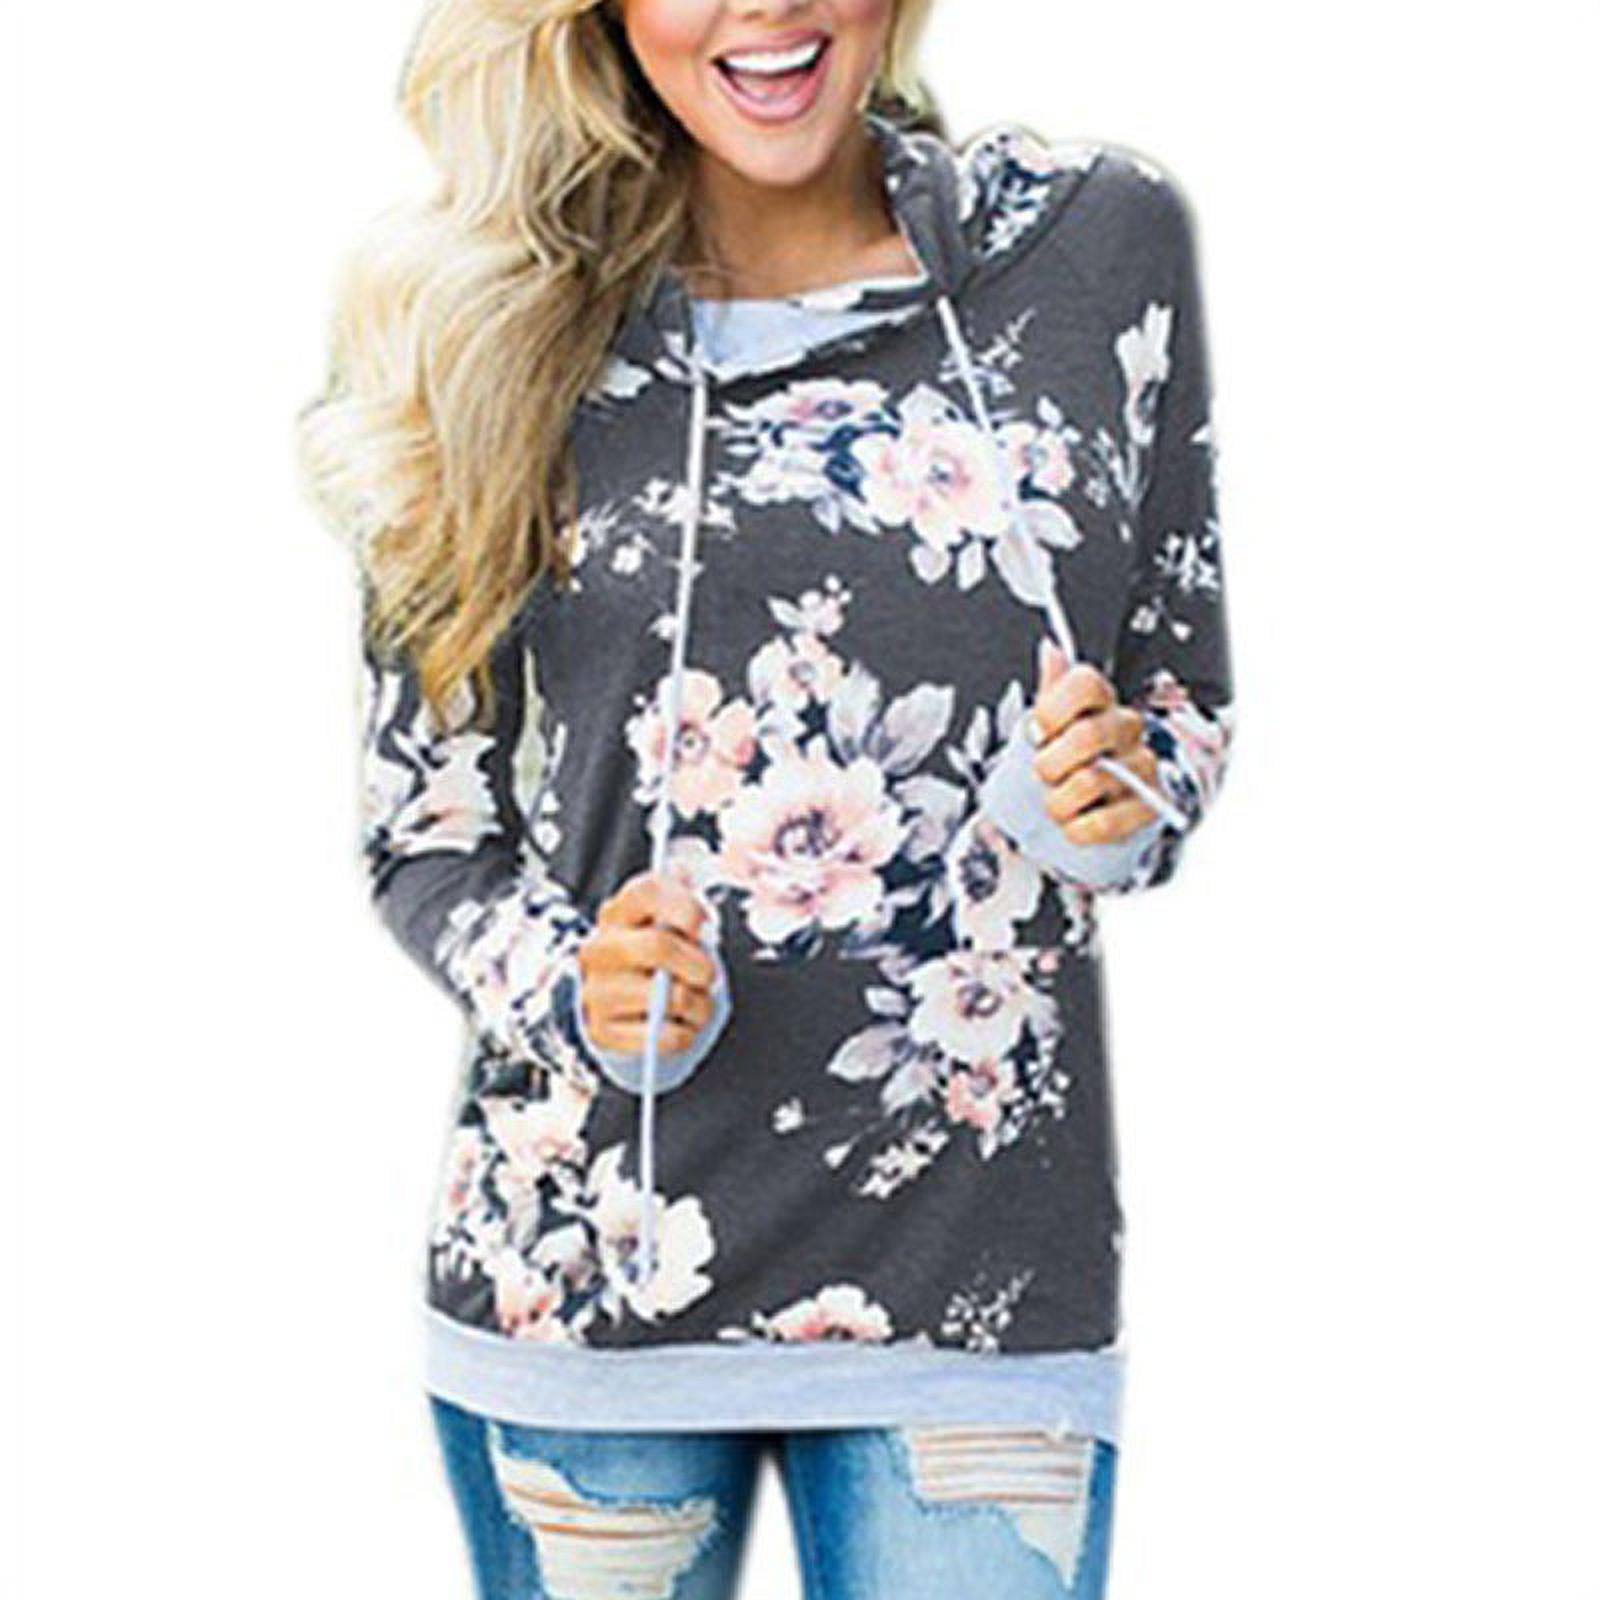 Cromoncent Womens Plus Size Letter Print Loose Fit Long Sleeve Hooded Pullover Sweatshirt